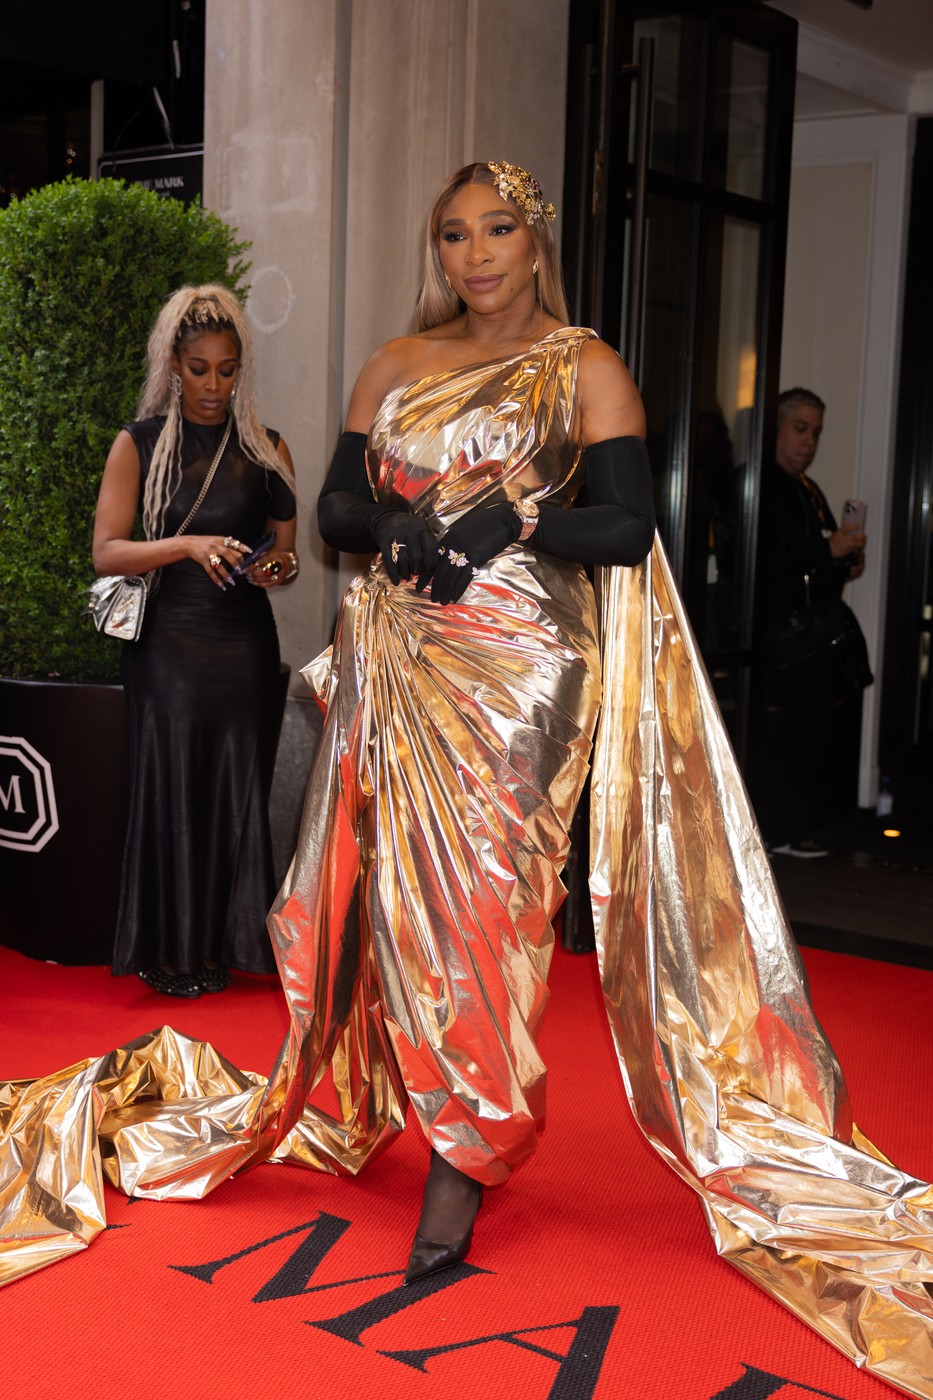 Serena Williams exits the mark hotel for met gala

Pictured:,Image: 870778089, License: Rights-managed, Restrictions: -ALLCOUNTRY, Model Release: no